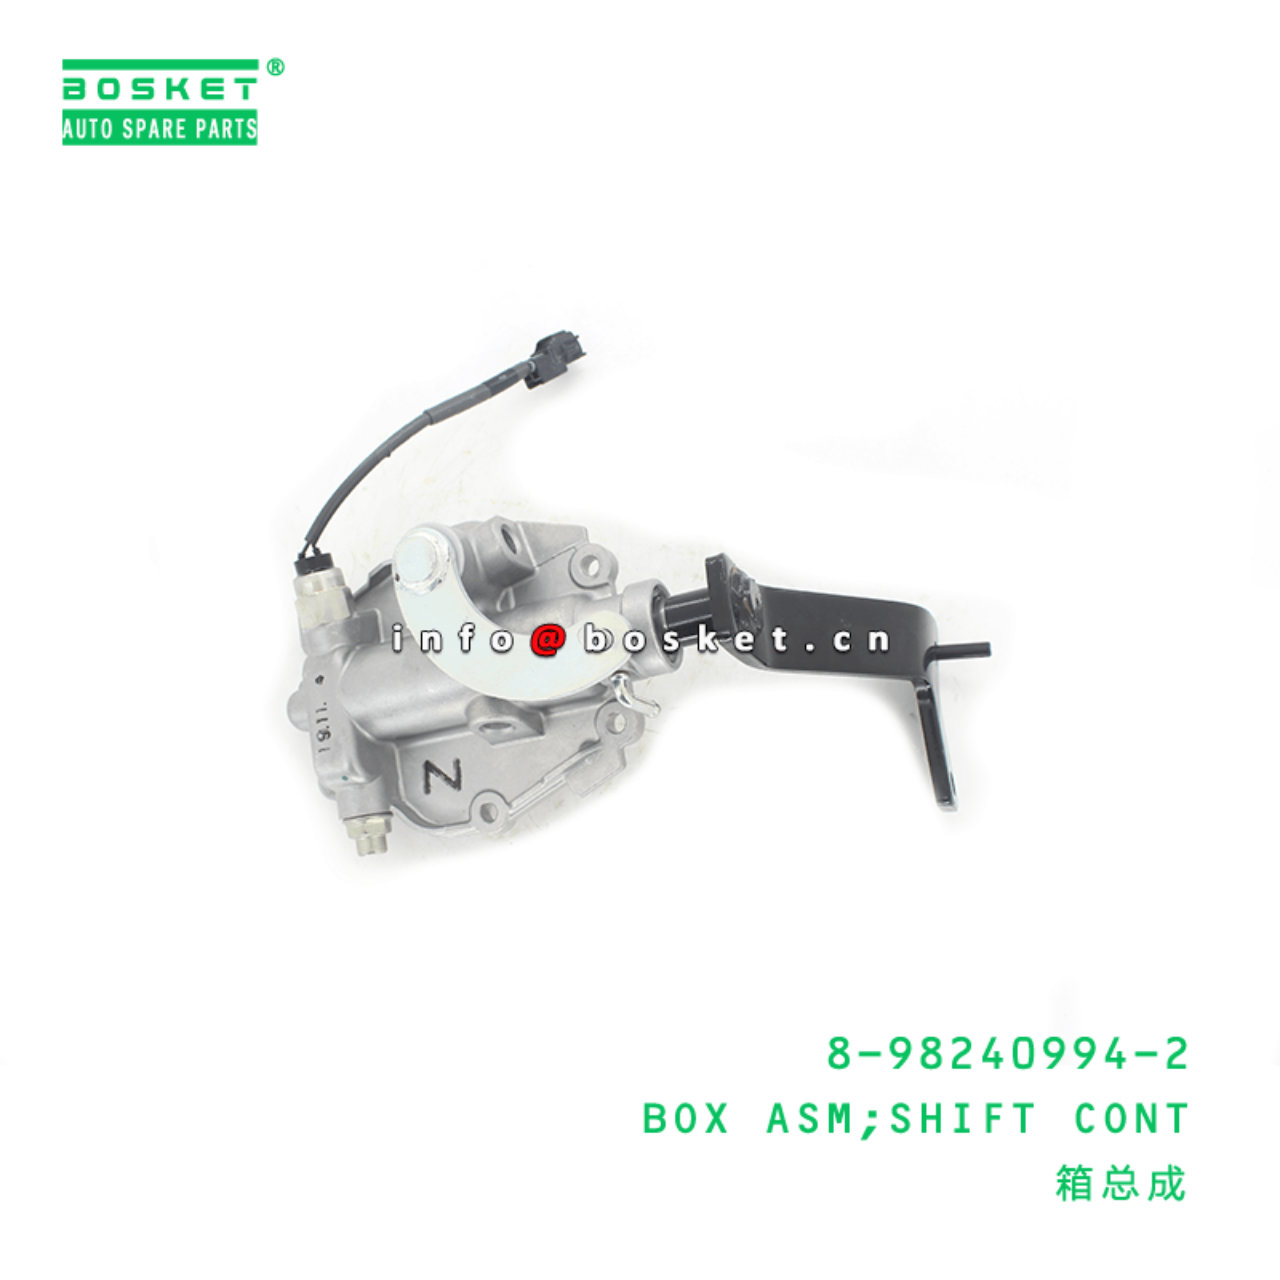 8-98240994-2 Shift Control Box Assembly 8982409942 Suitable for 